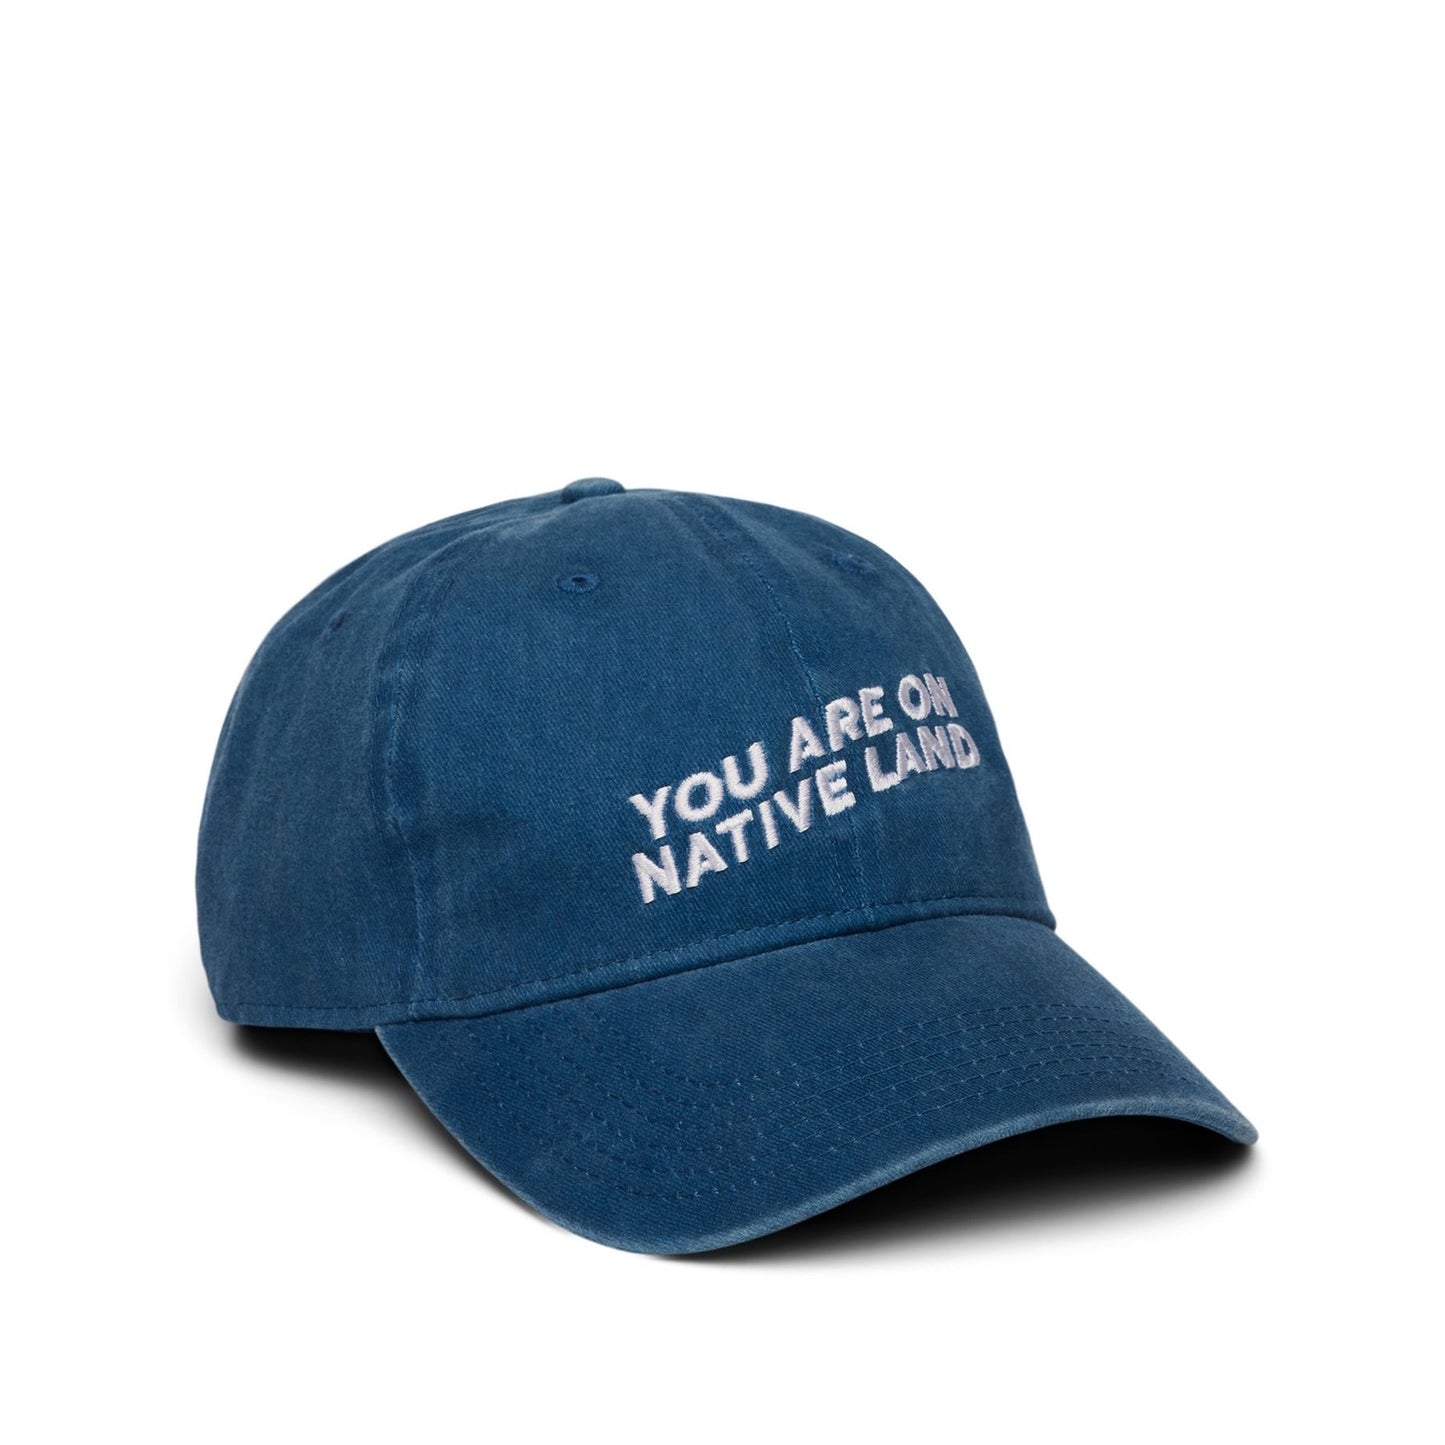 'YOU ARE ON NATIVE LAND' DAD CAP BLUE